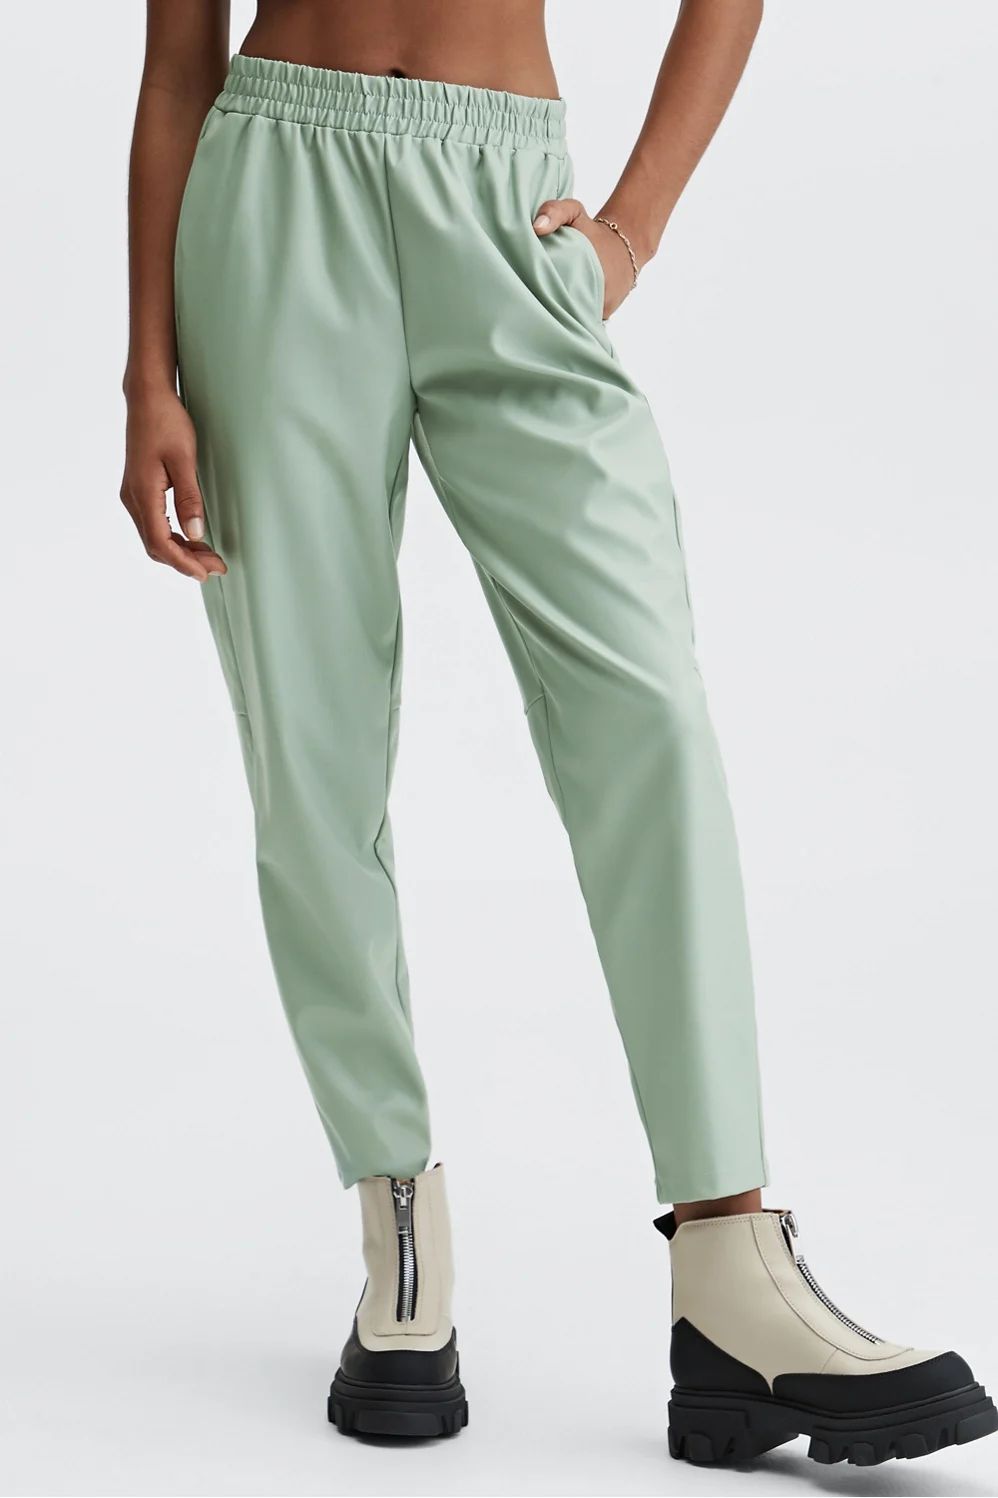 Vegan Leather High-Waisted Pant | Fabletics - North America